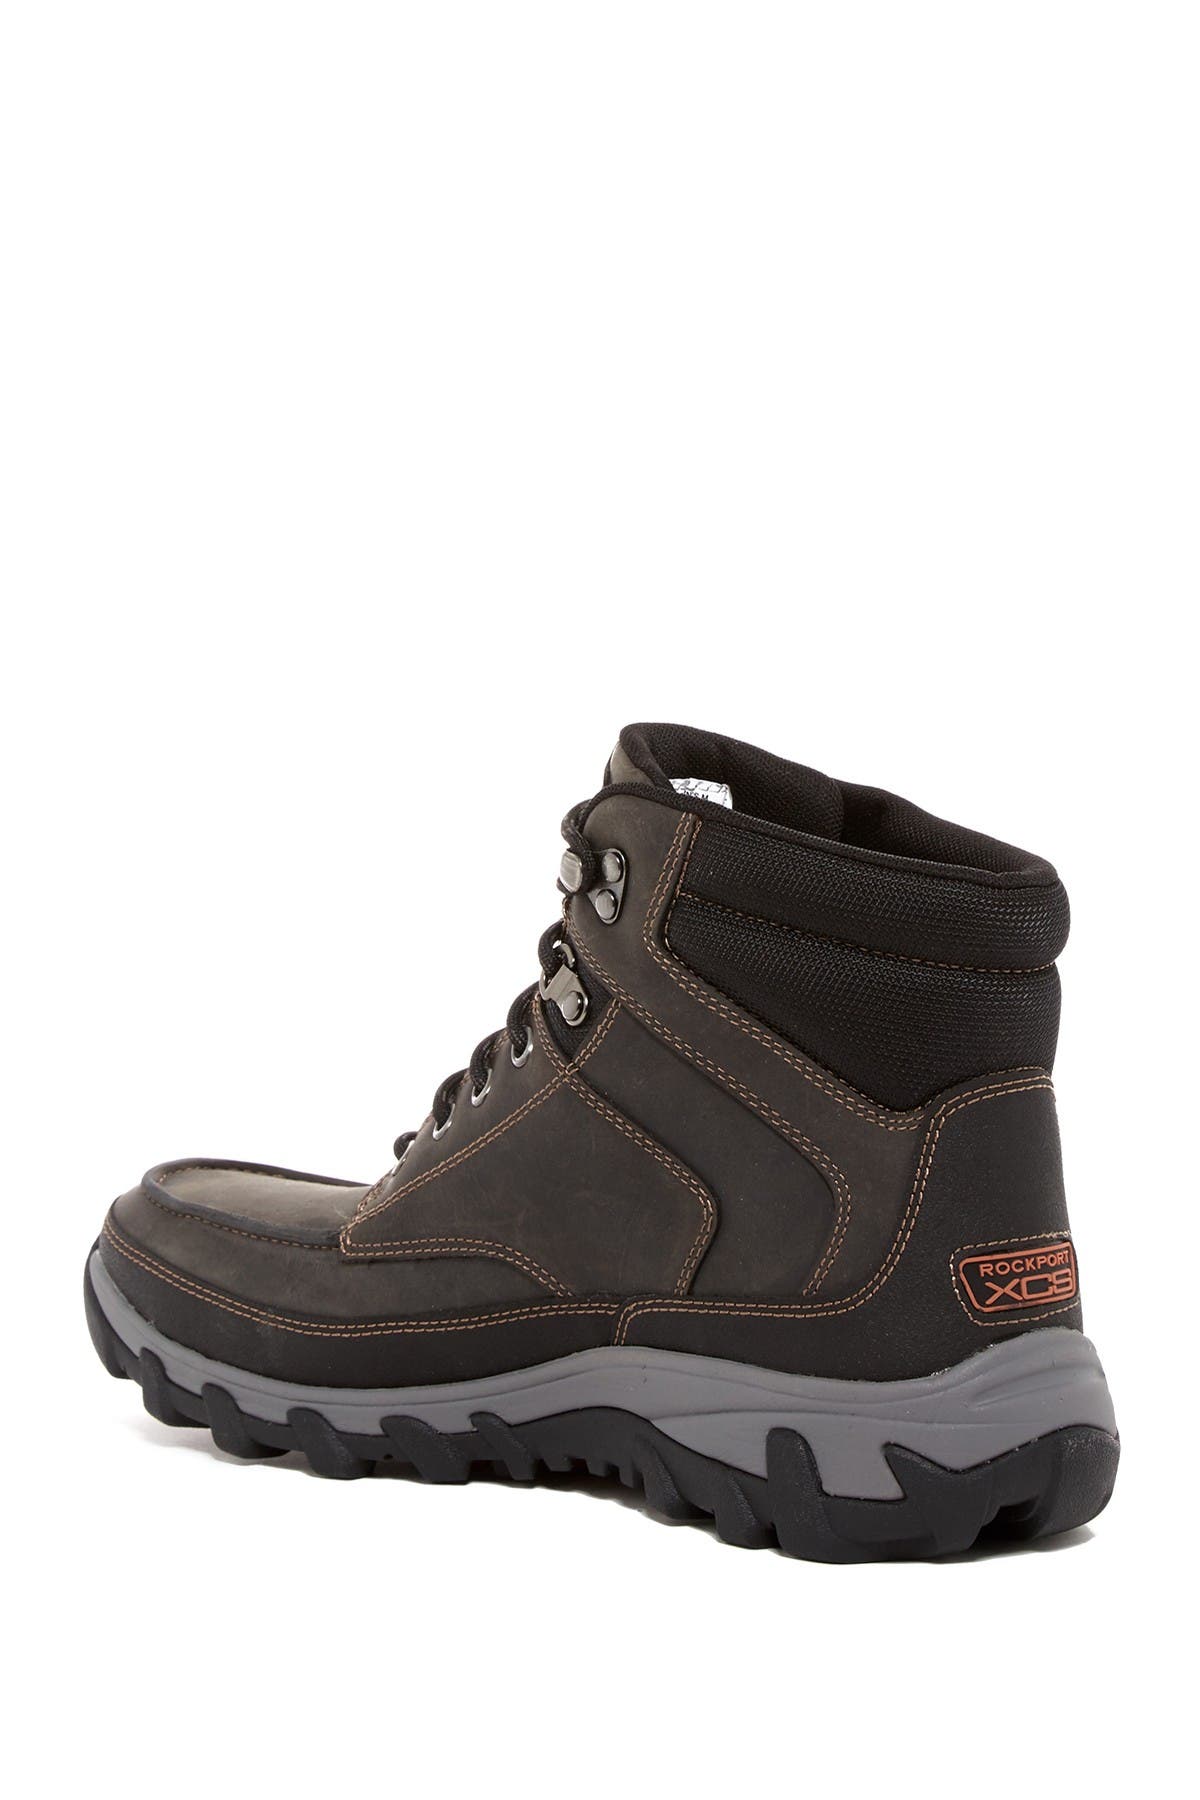 rockport cold springs moc toe boots